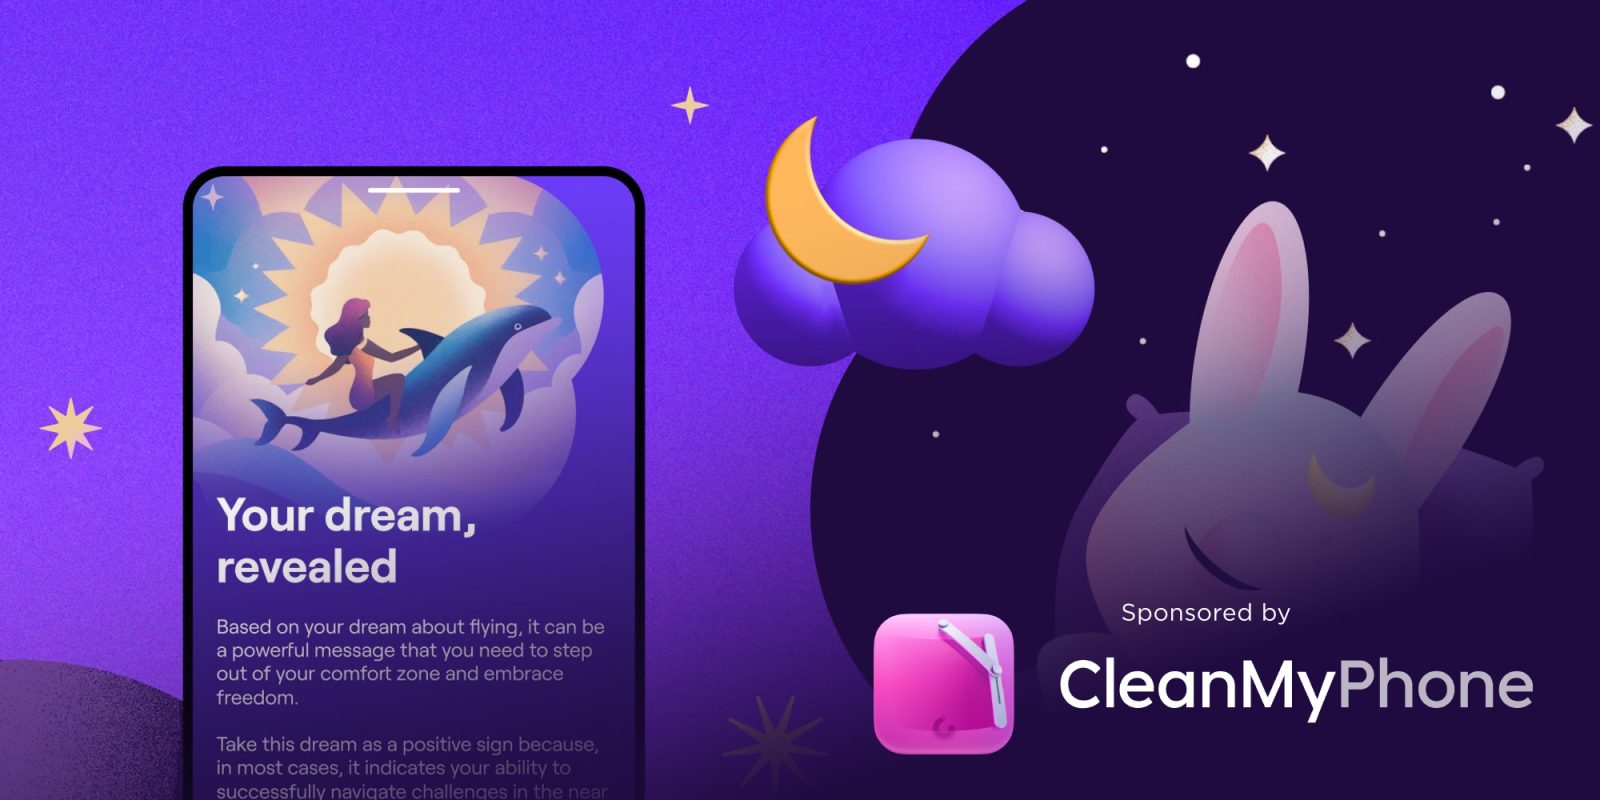 Mindfulness app 'Moonly' updated with AI-based feature to interpret dreams